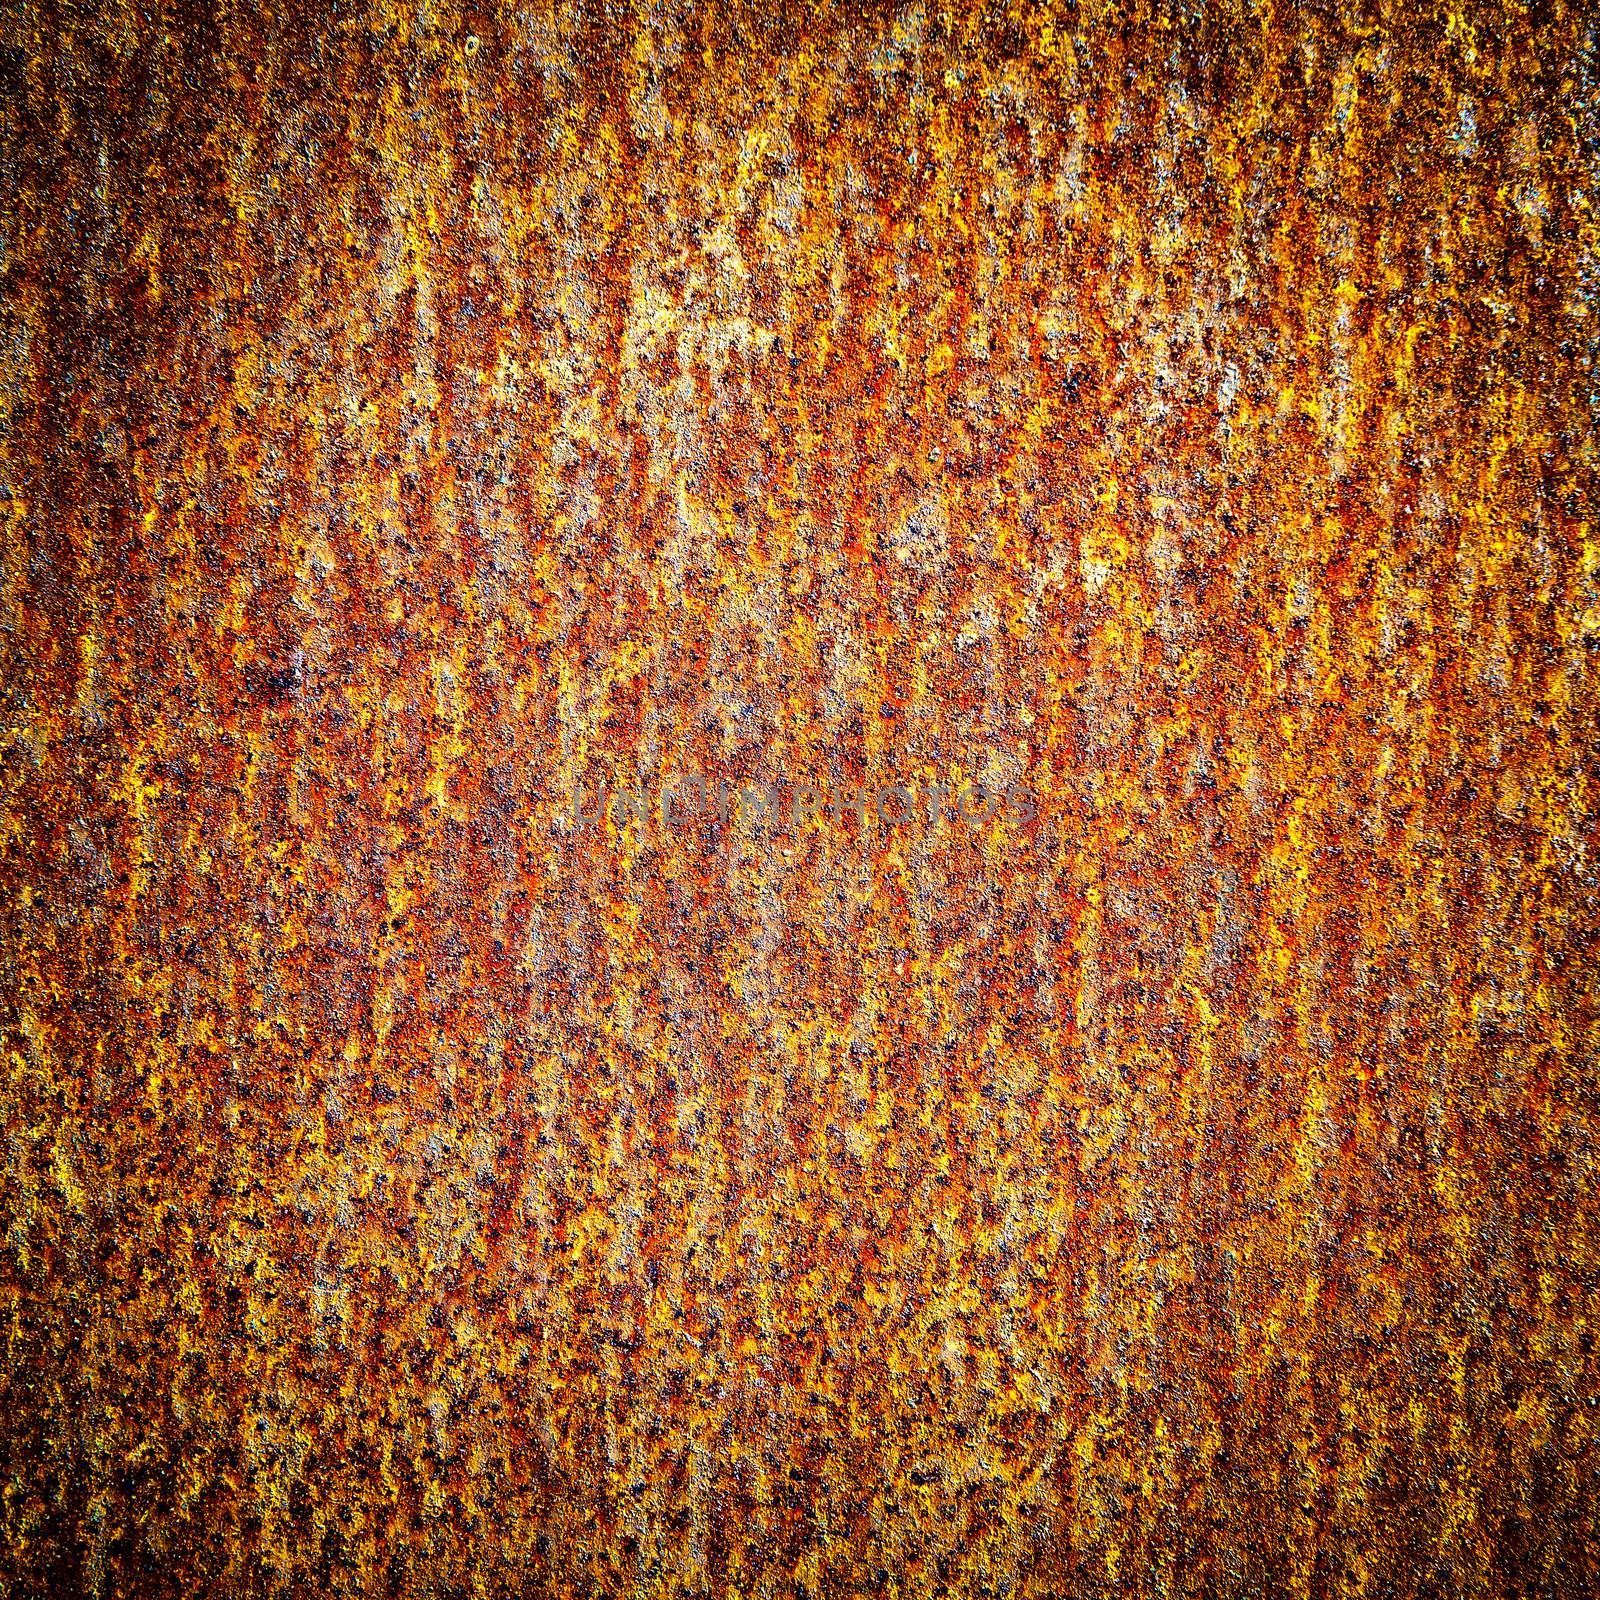 Old rust surface can be used for background and texture